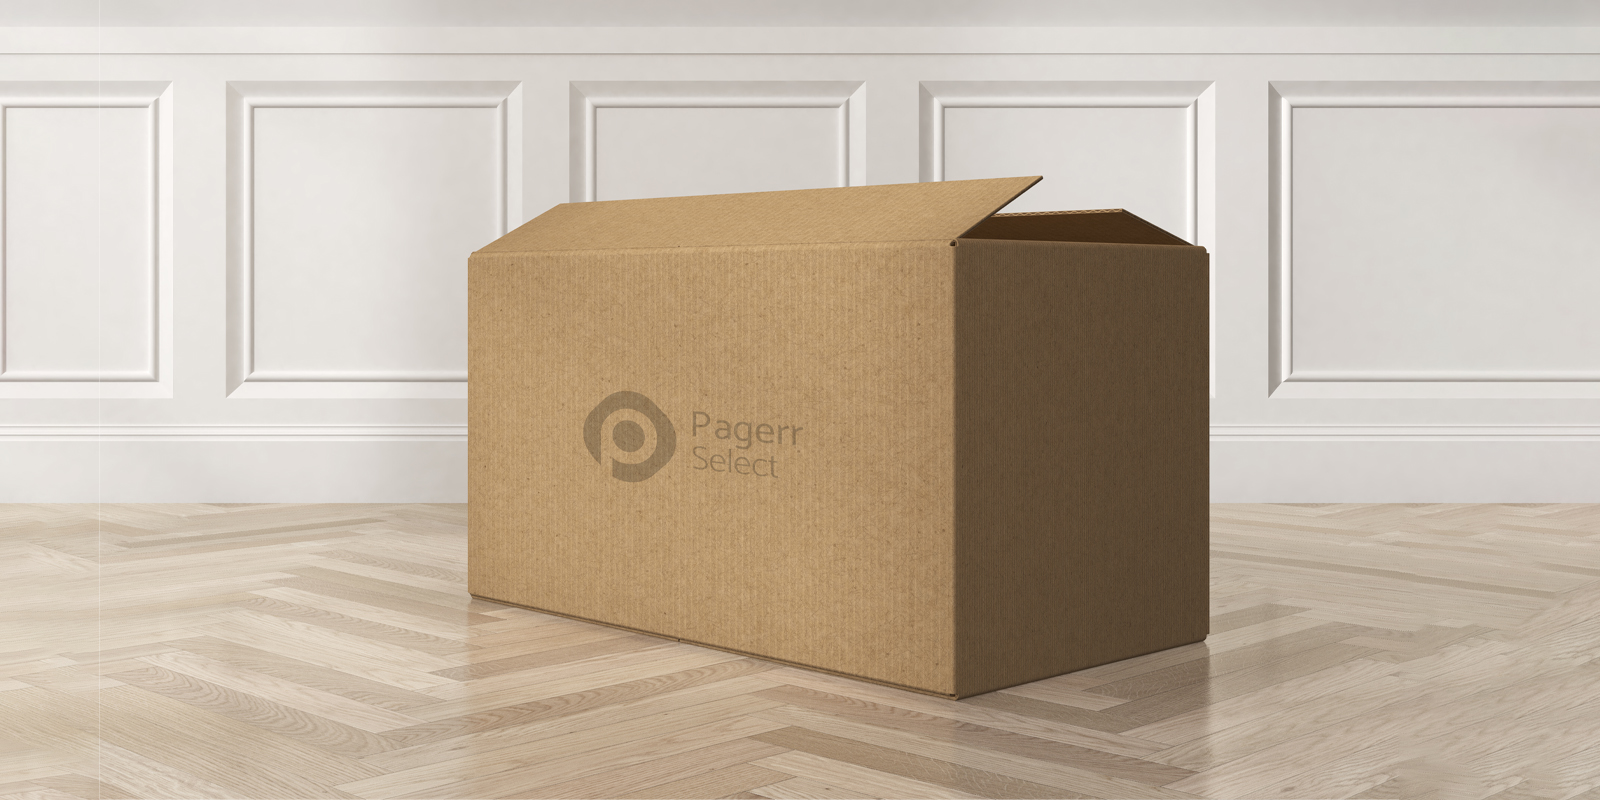 Moving boxes in Bendigo - Print with Pagerr